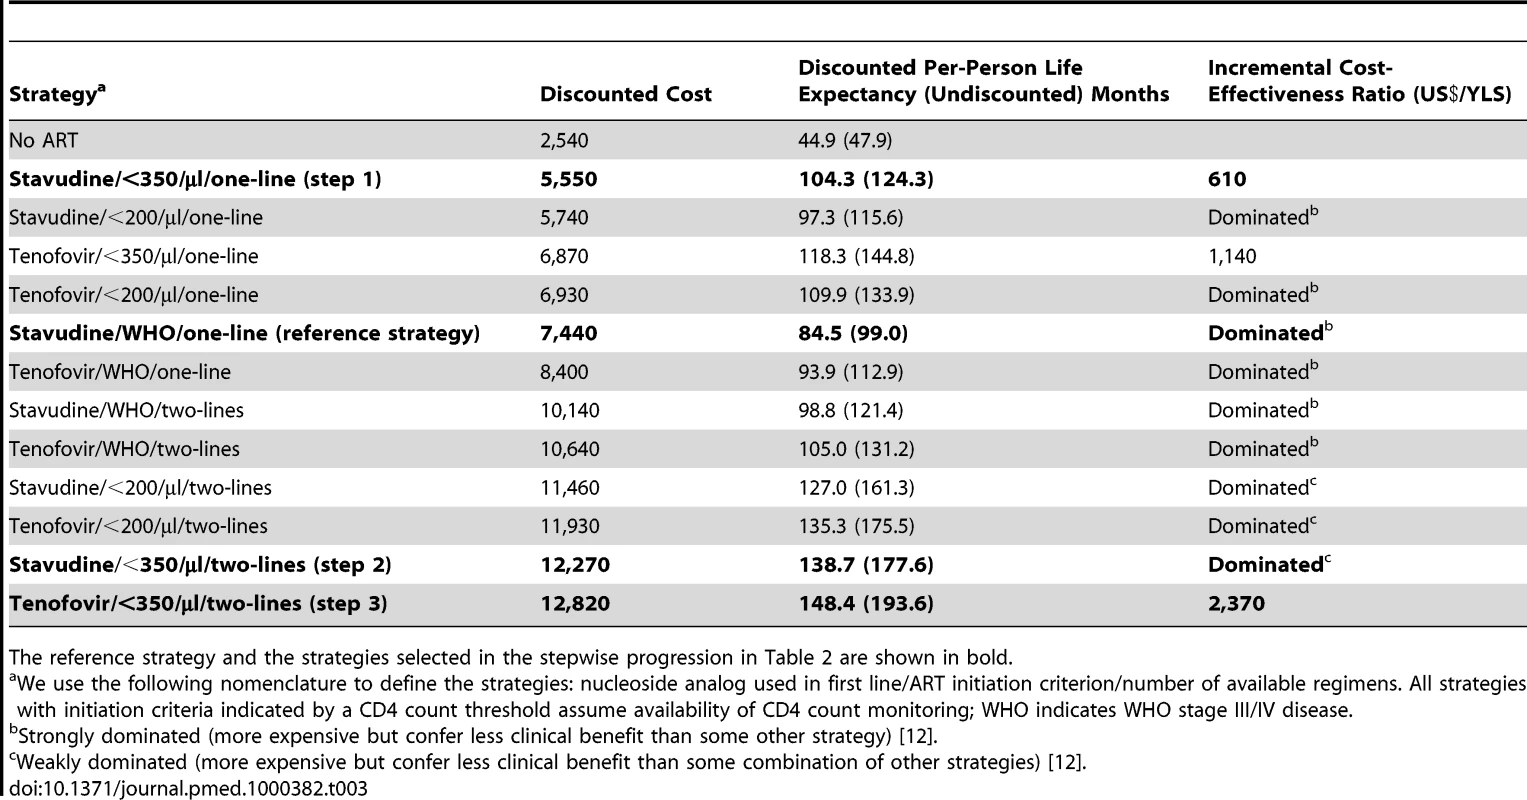 Life expectancy, costs, and incremental cost-effectiveness ratios of the 12 possible stepwise combinations (and no ART) from the reference strategy to full implementation of 2010 WHO HIV treatment guidelines.